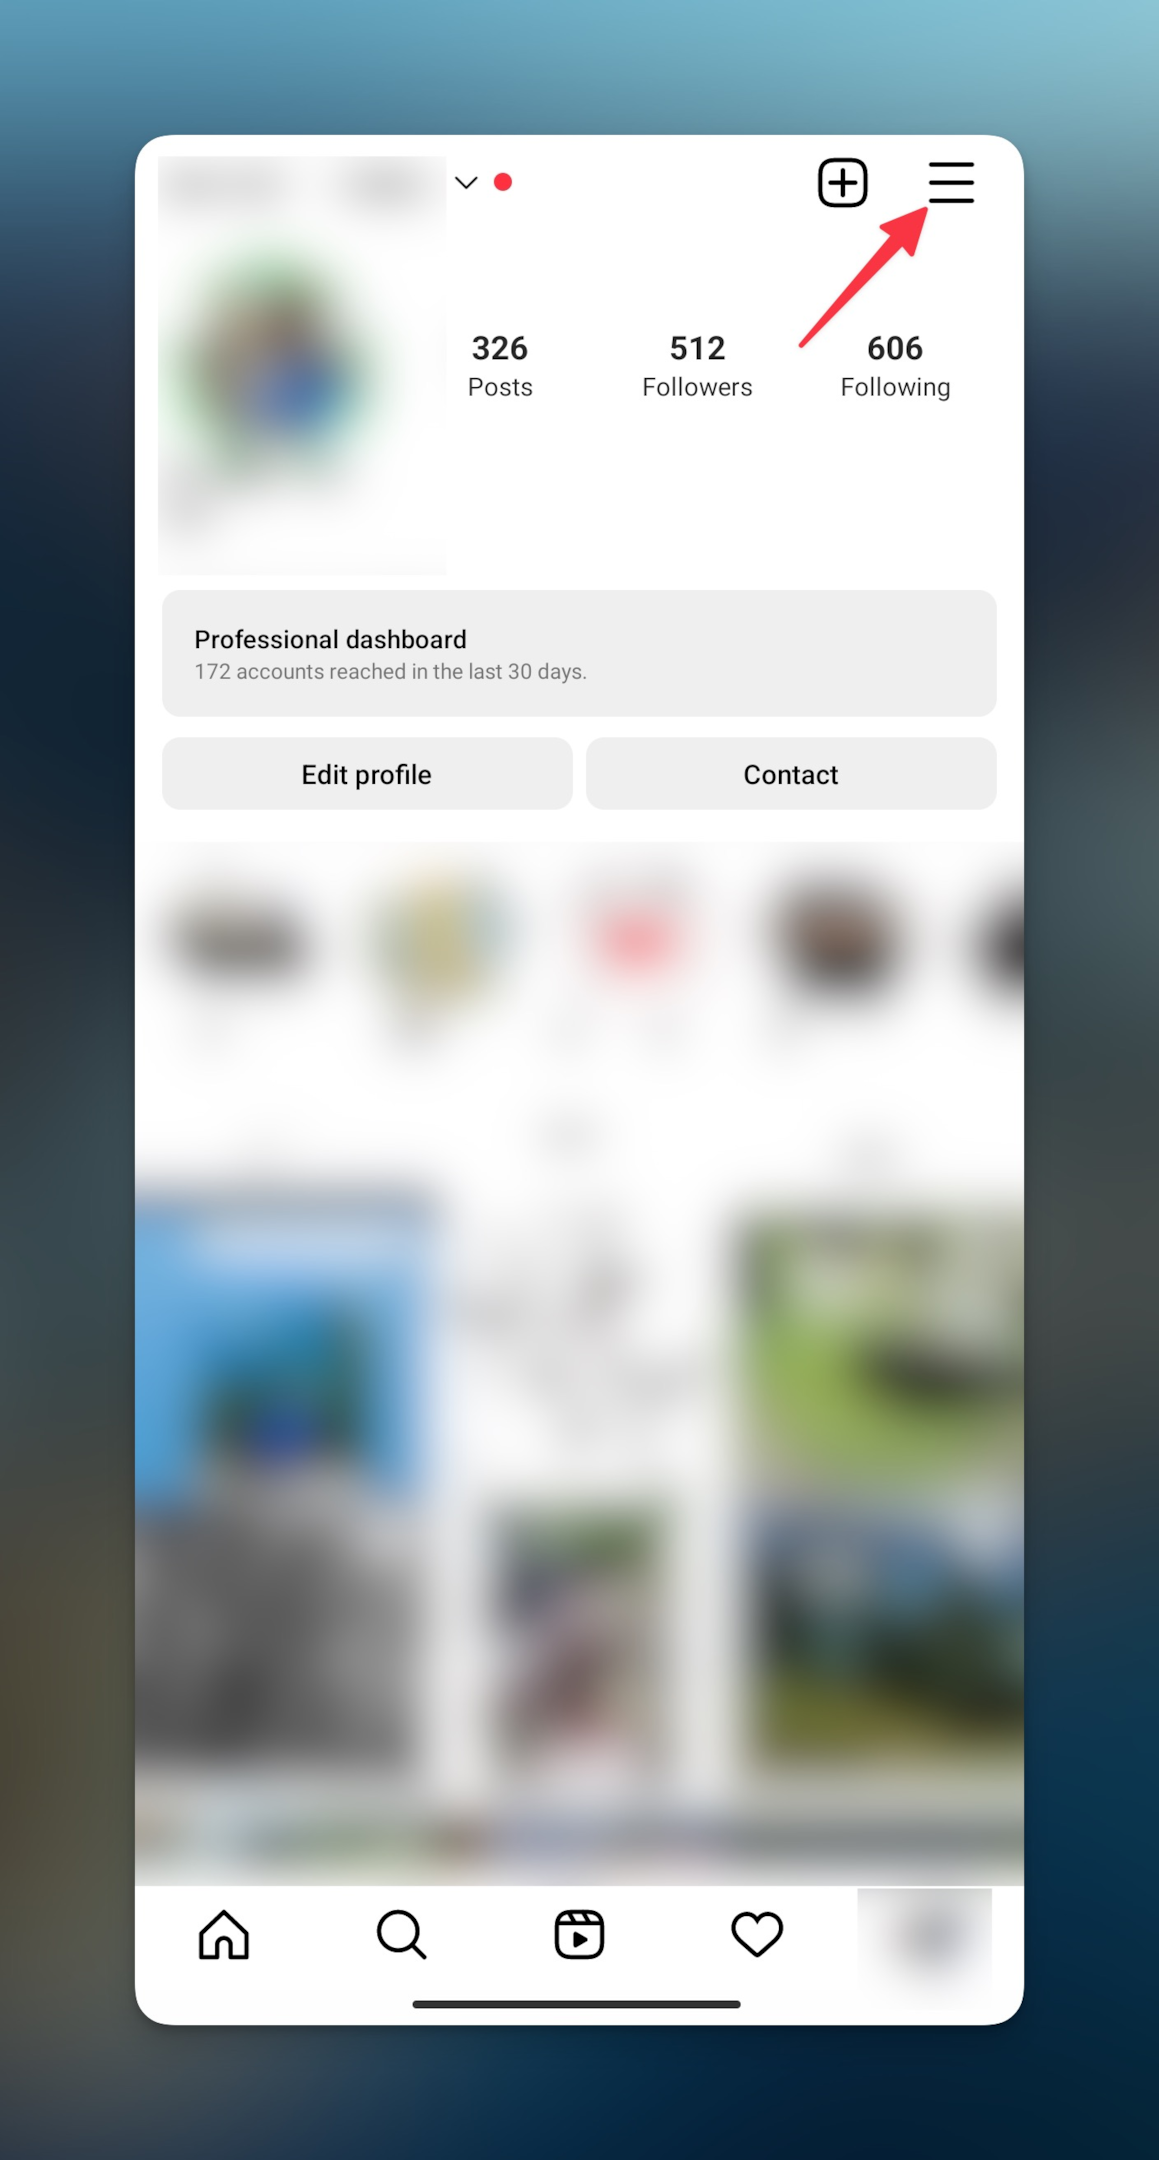 Remote.tools show to go to your Instagram profile page and tap on hamburger menu to go to settings